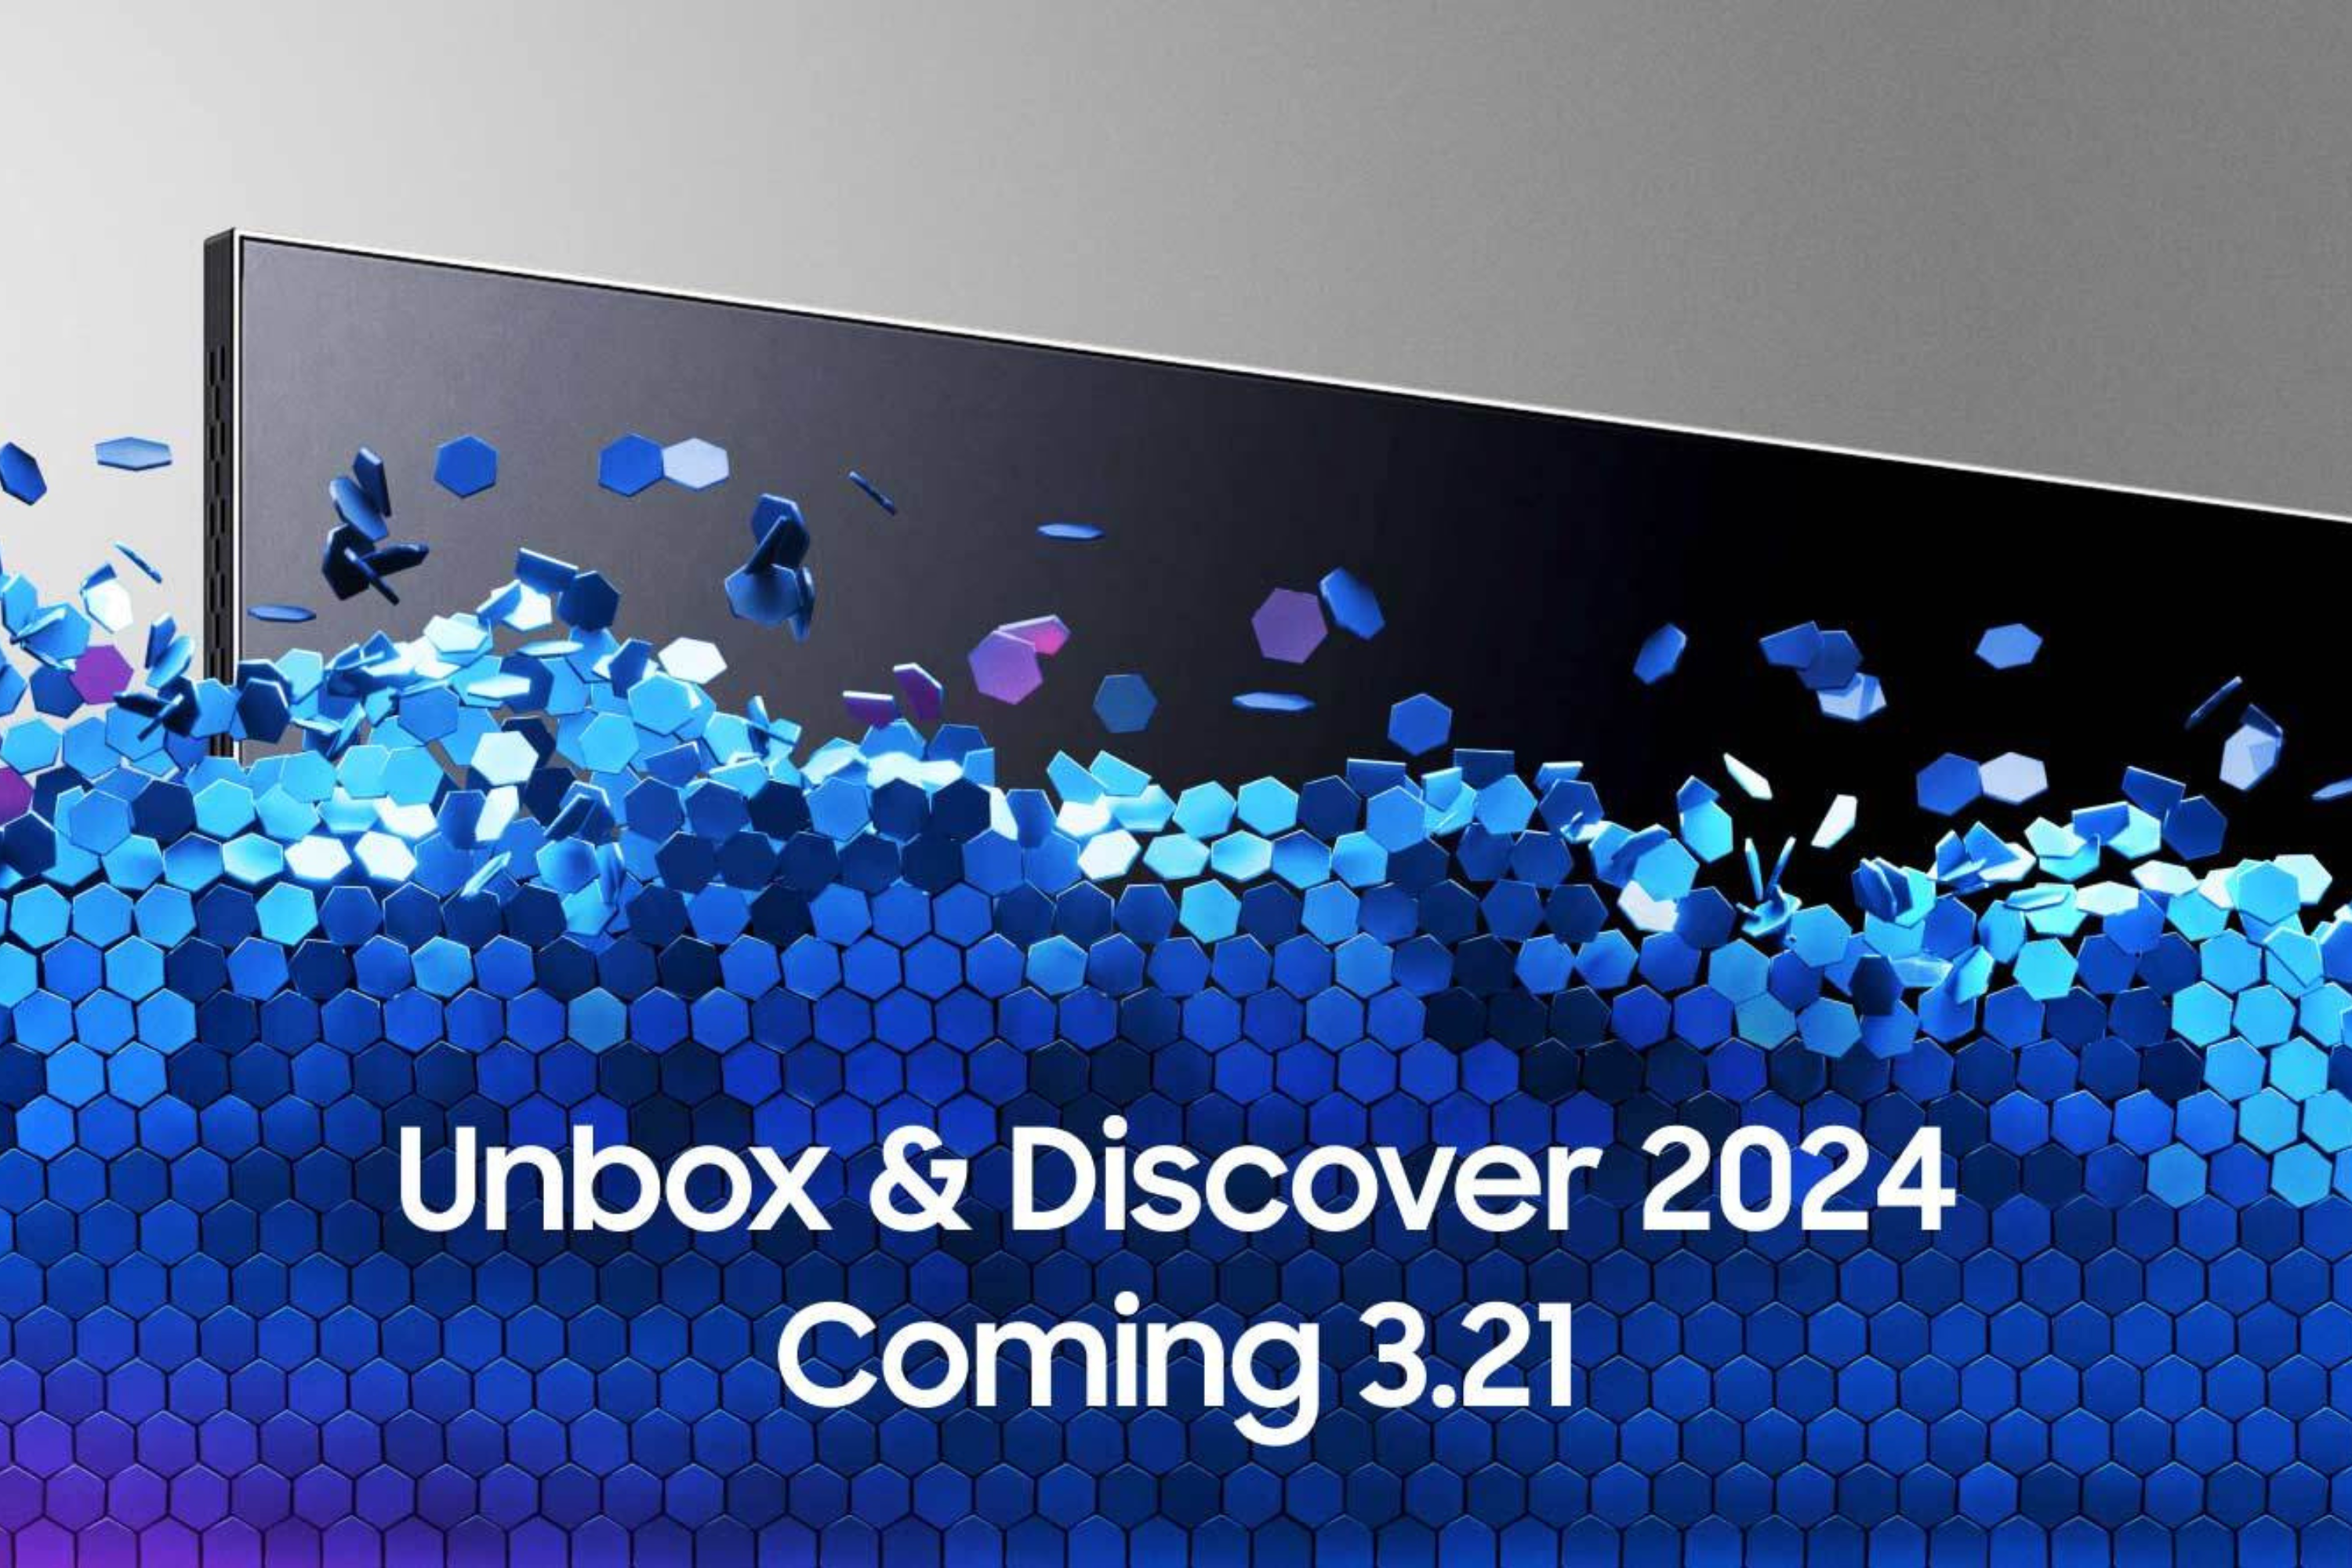 samsung unbox and discover event 